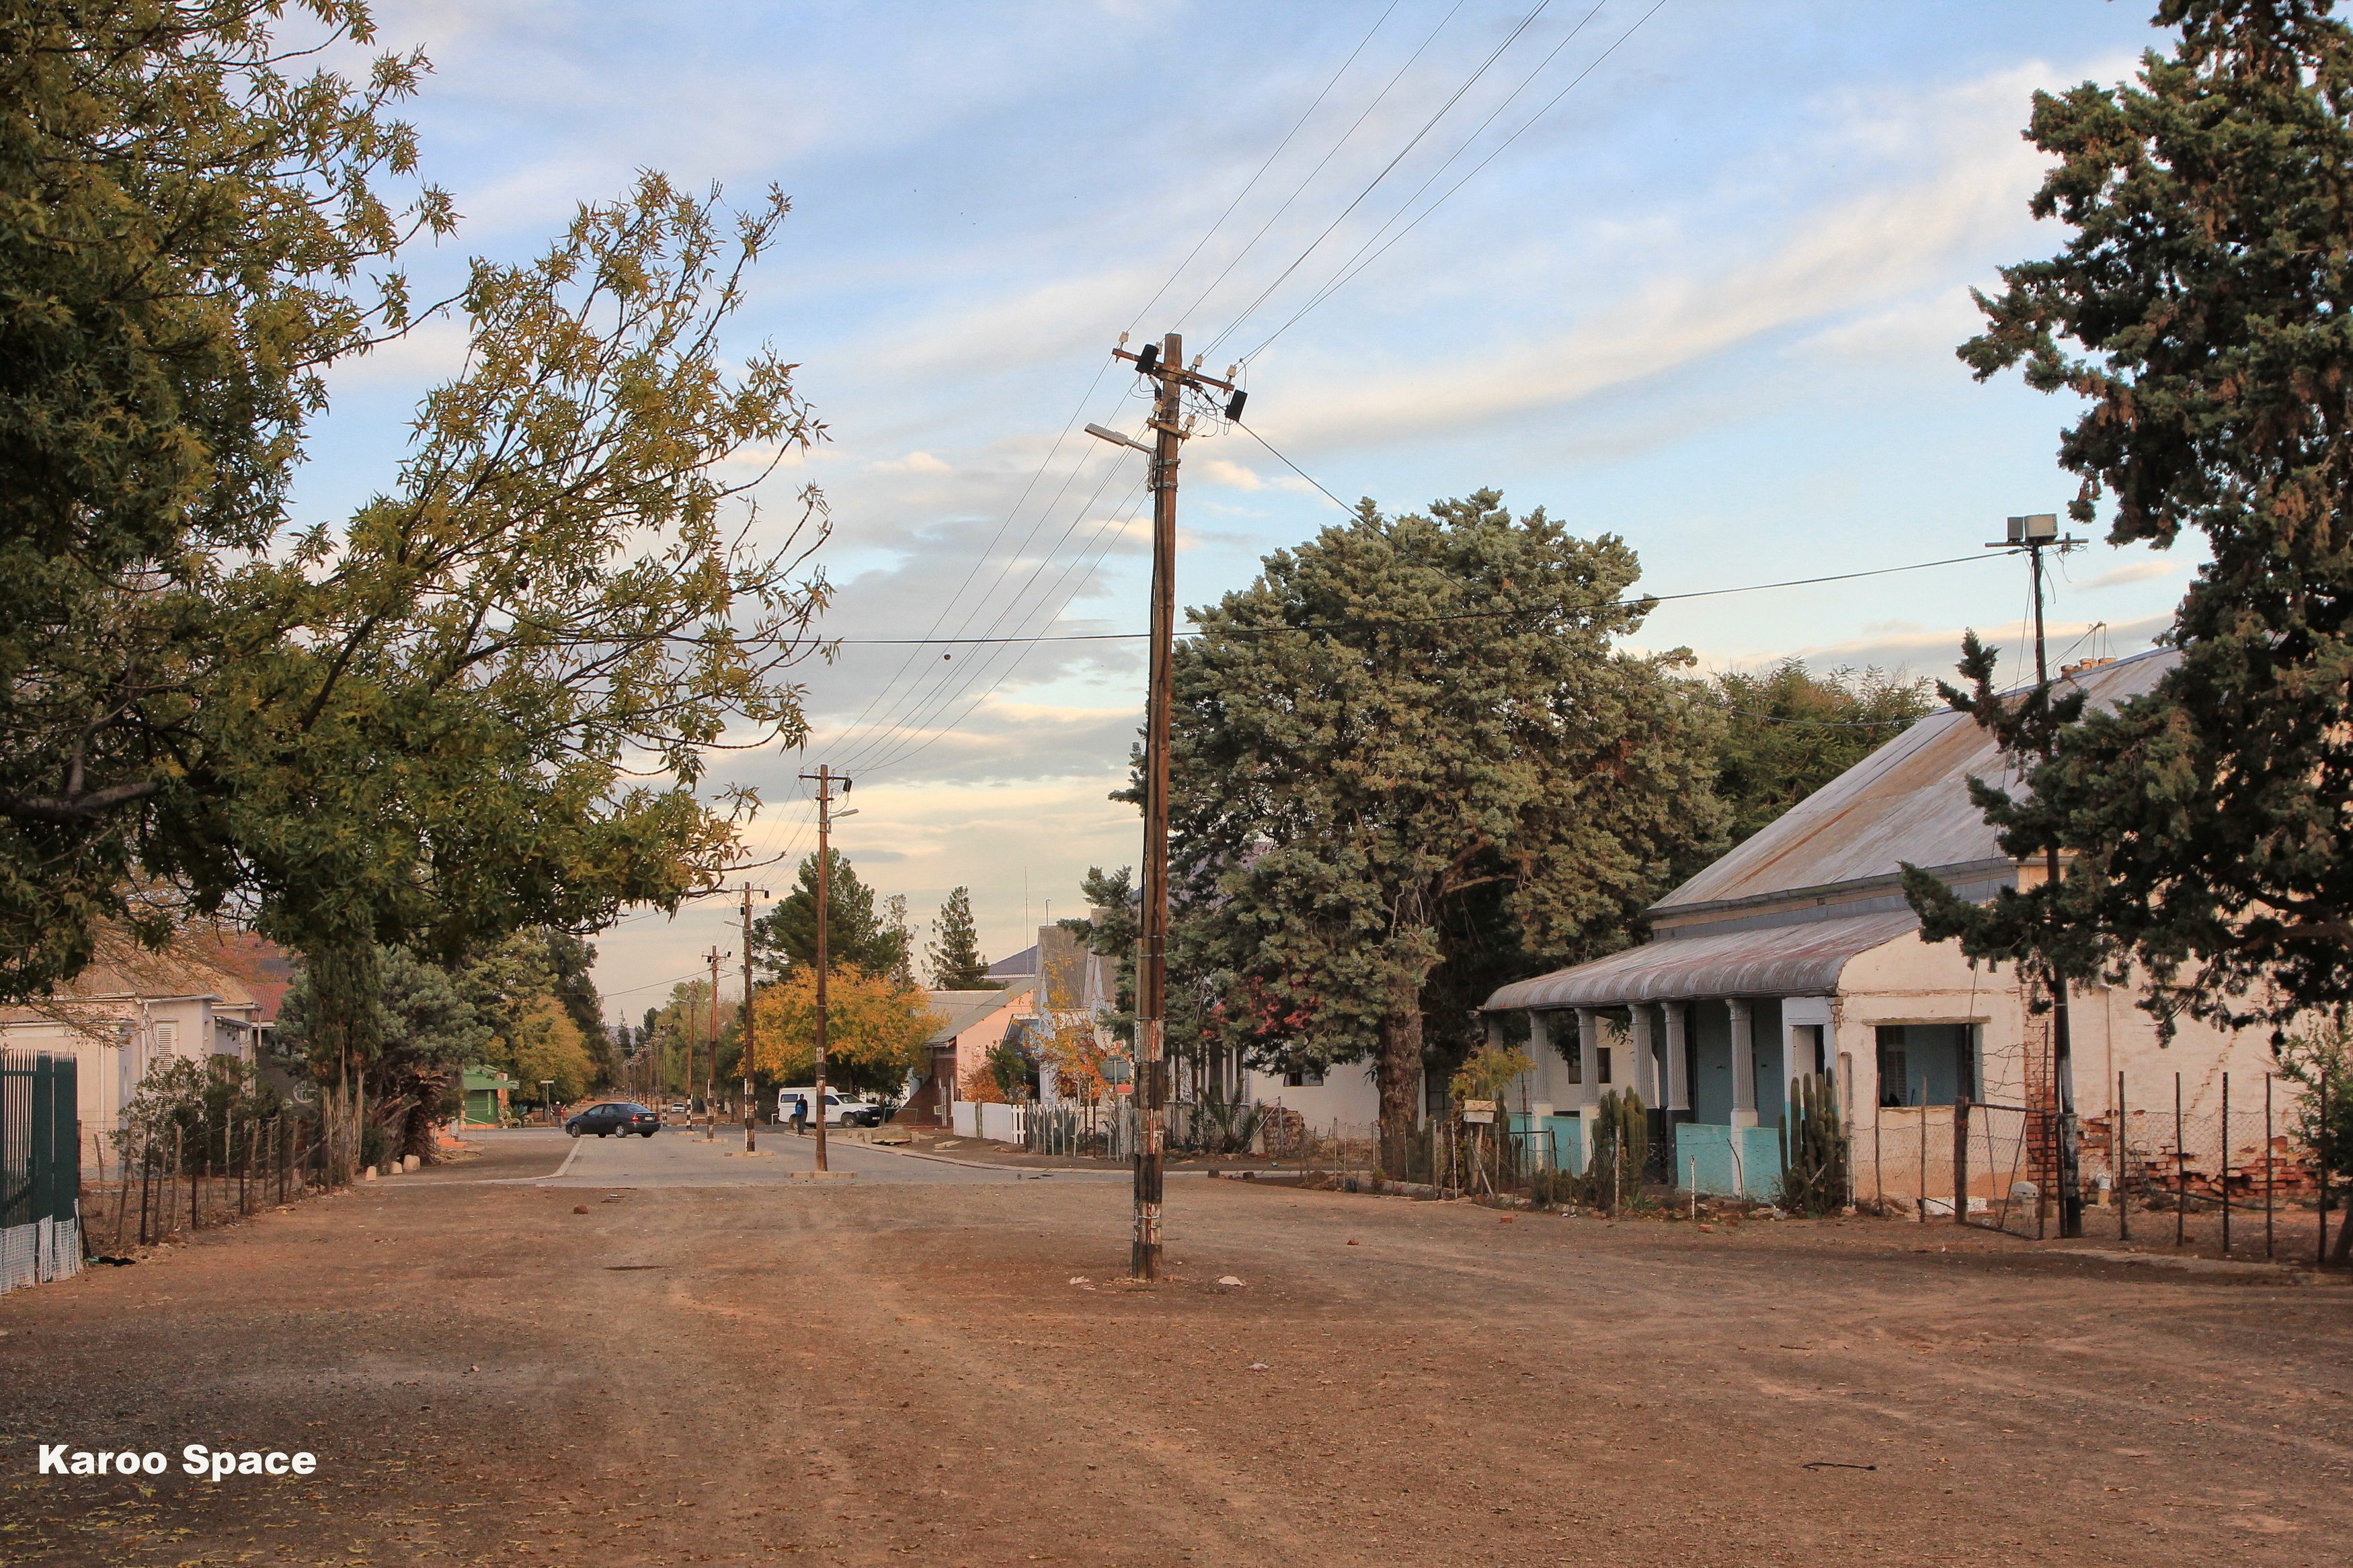 The dusty, pre-dawn streets of Murraysburg – a picture of peacefulness.